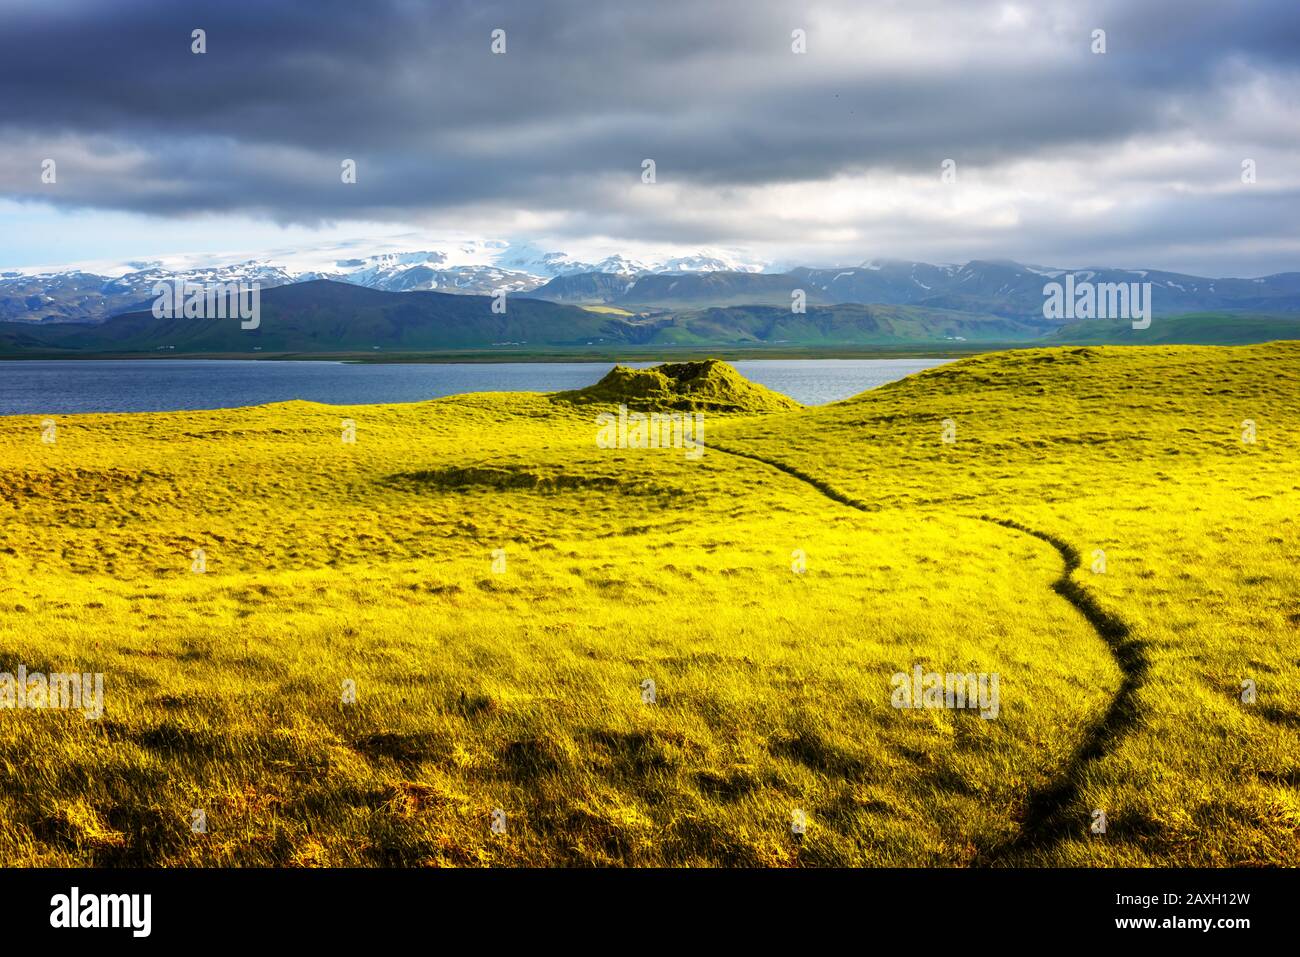 Gorgeous Iceland landscape with green grass field, blue lake and snow-capped mountains in the background. Iceland, Europe Stock Photo